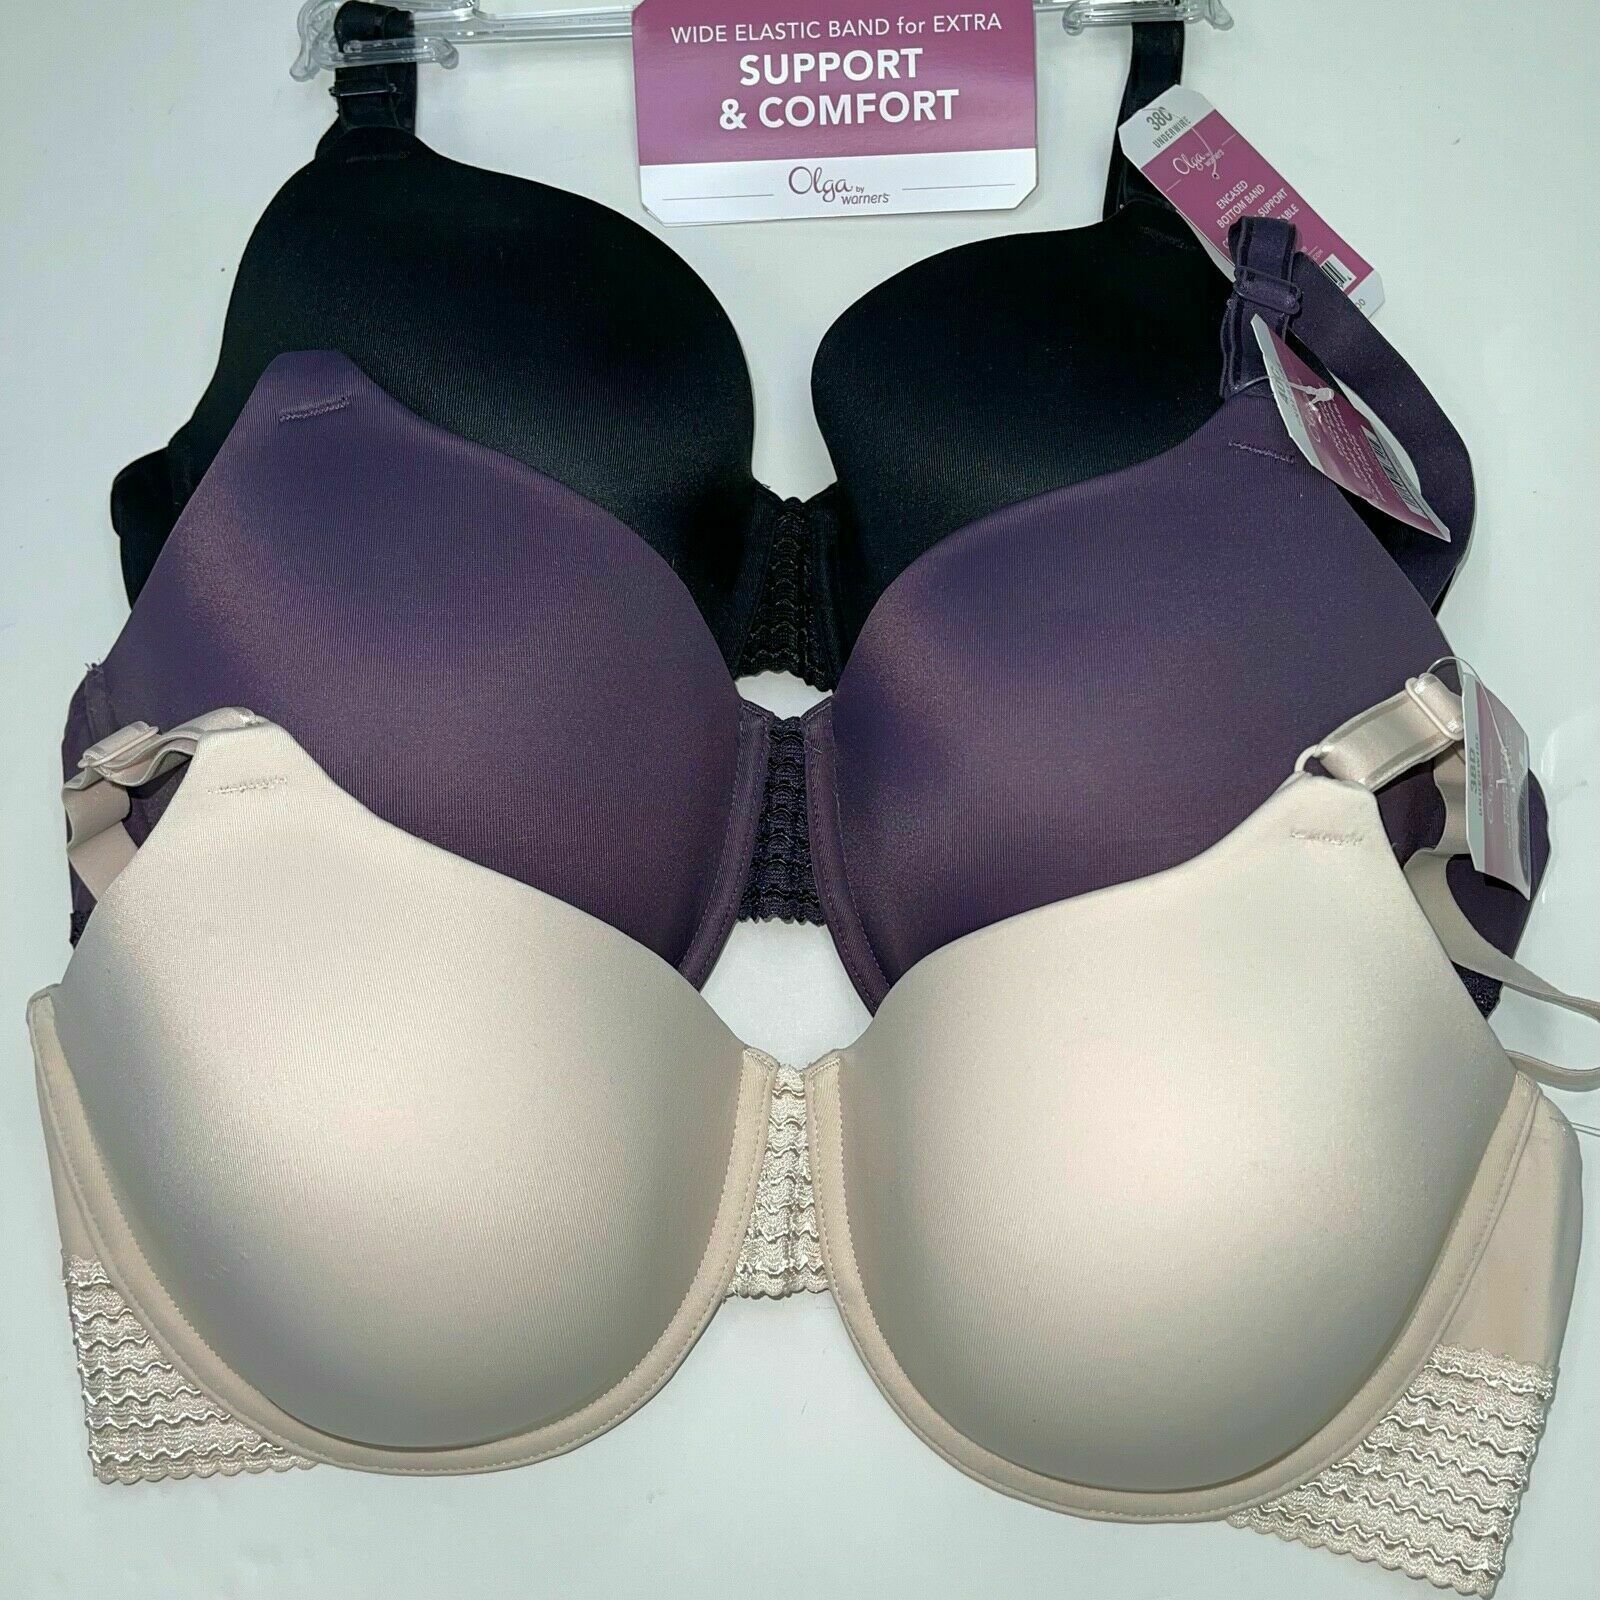 Olga Bra Underwire Support Wide Band Full and 50 similar items